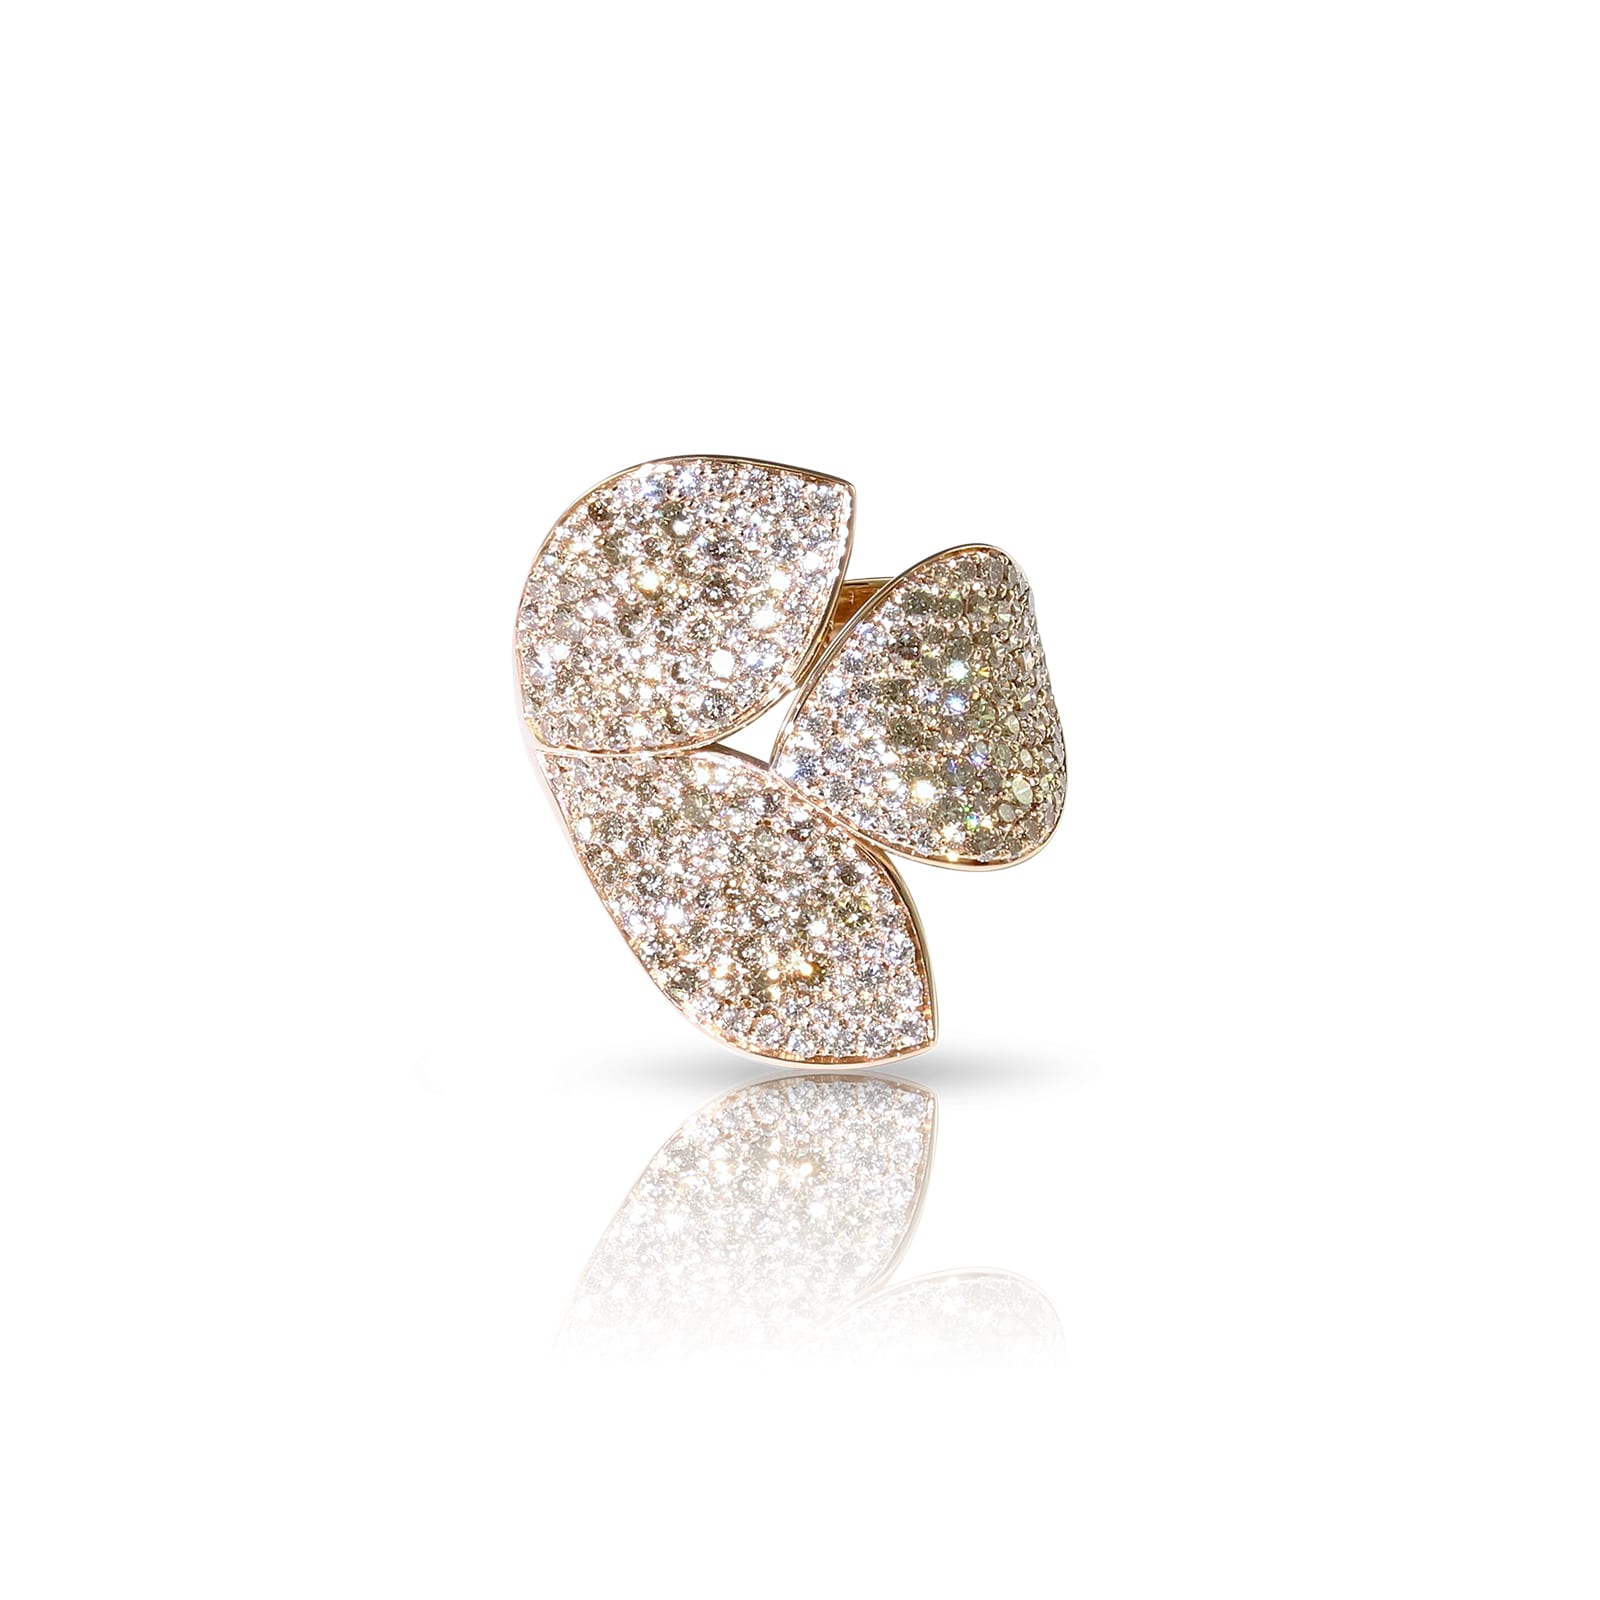 Giardini Segreti Three Leaves Ring in 18ct Rose Gold with White and Champagne Diamonds - Ring Size P